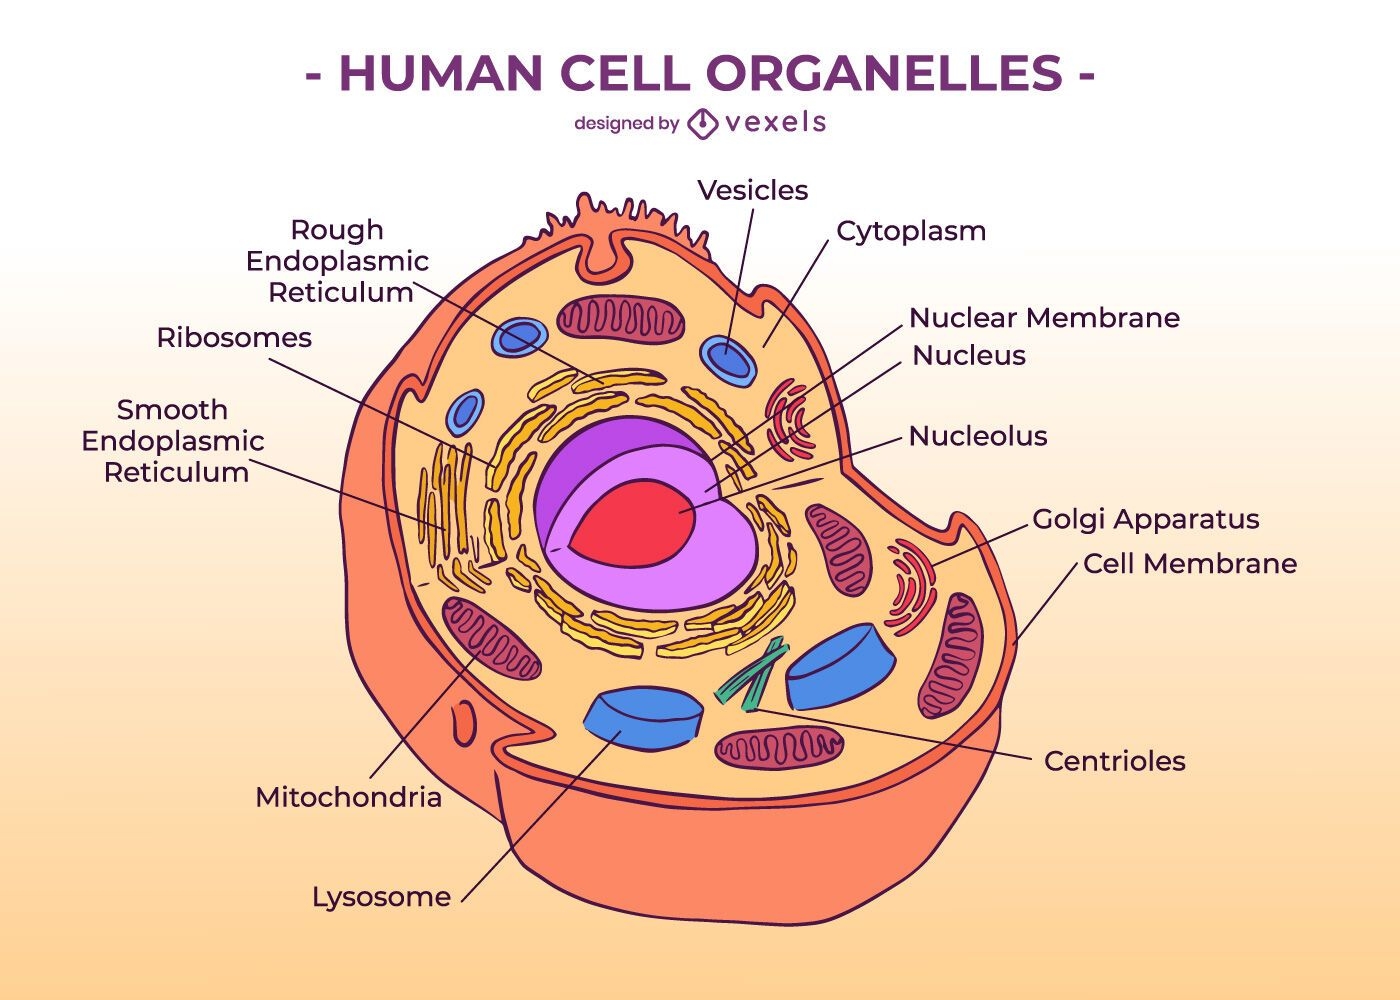 human cell model labeled